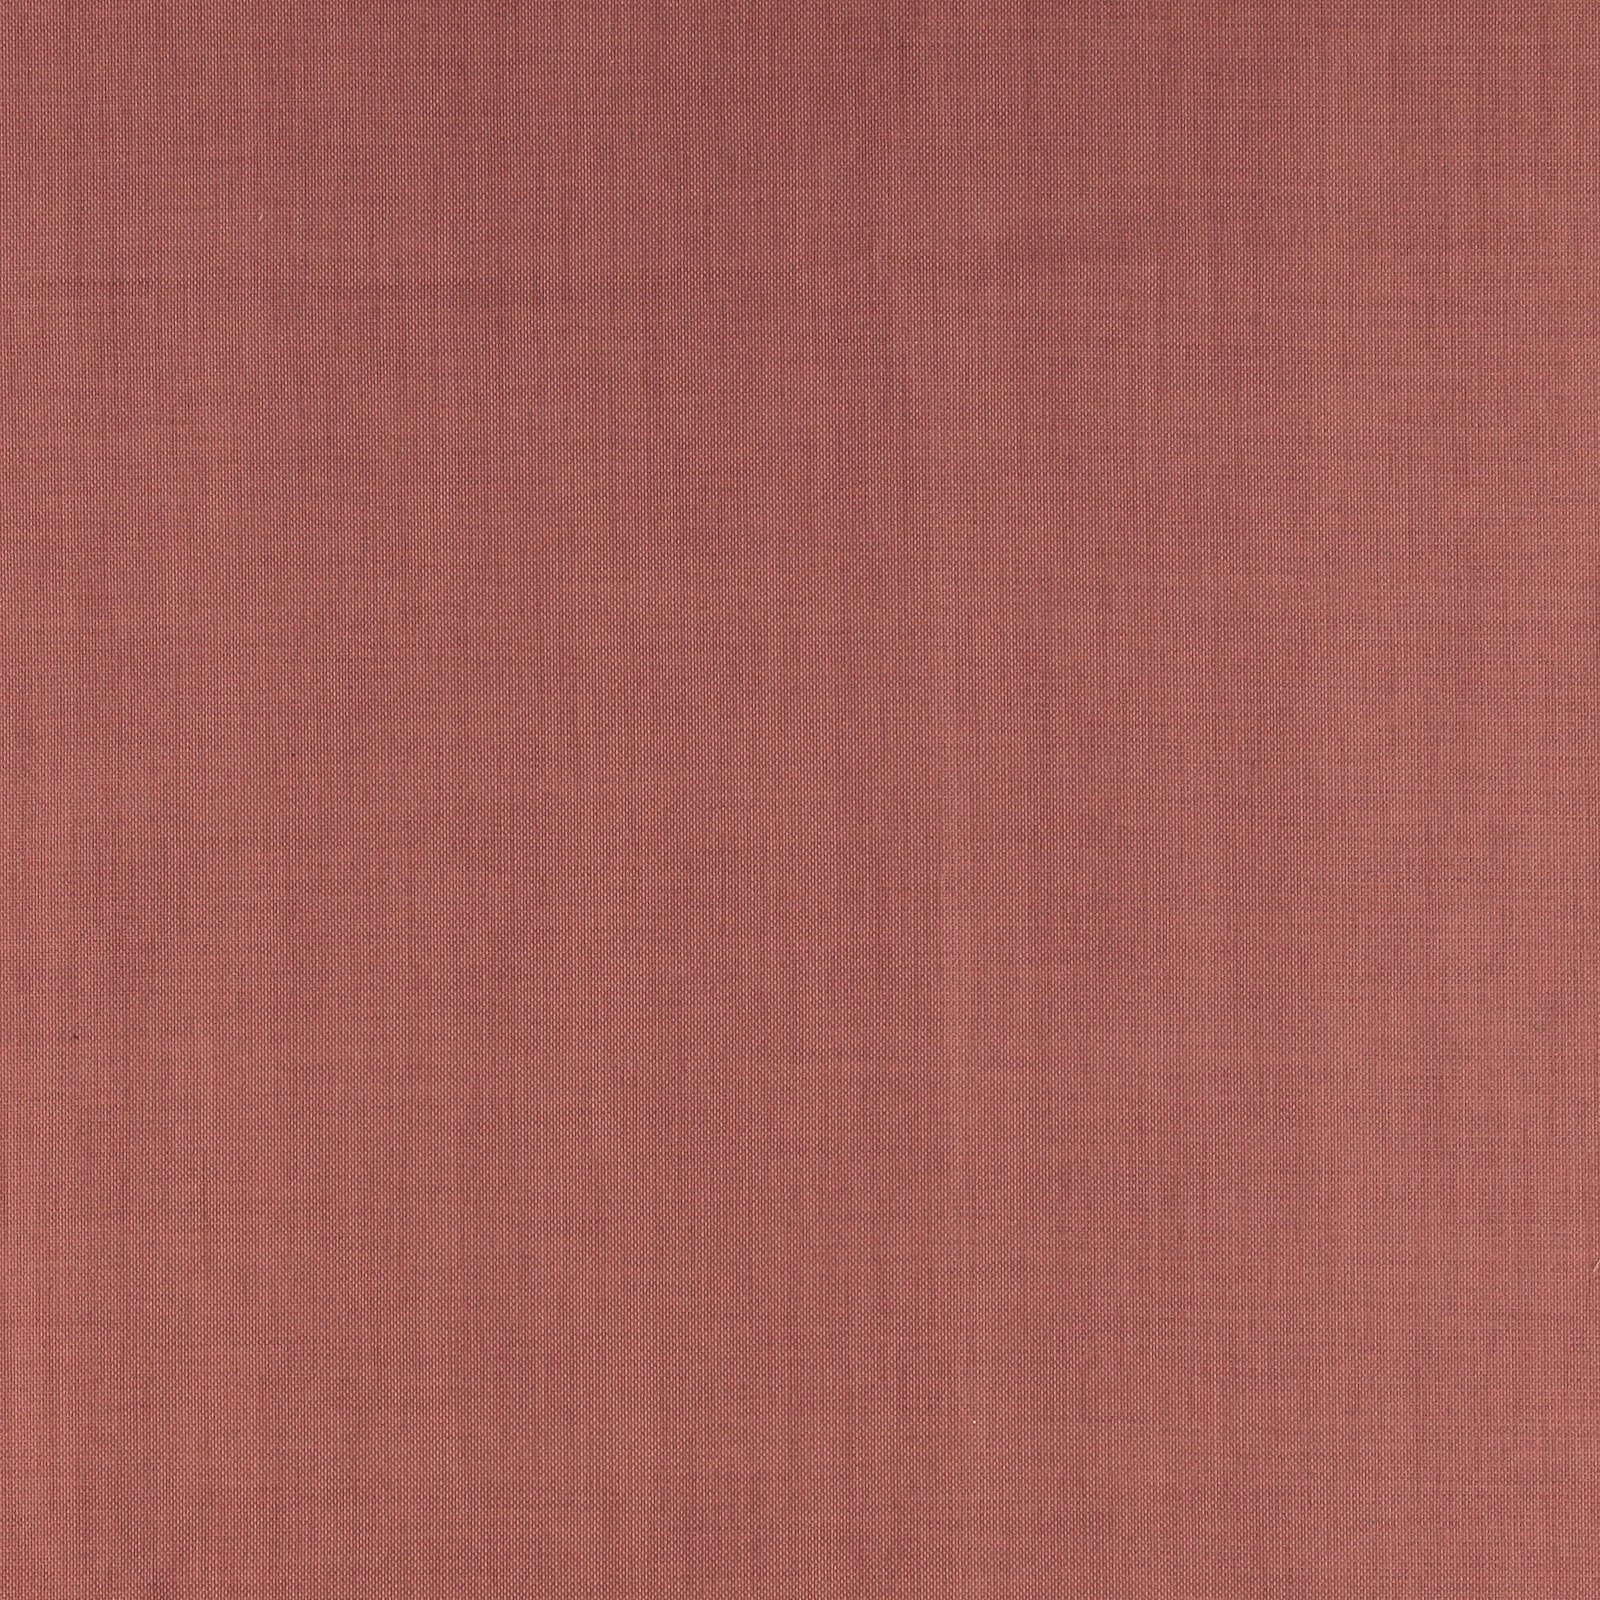 Upholstery fabric rhubarb red 823596_pack_sp